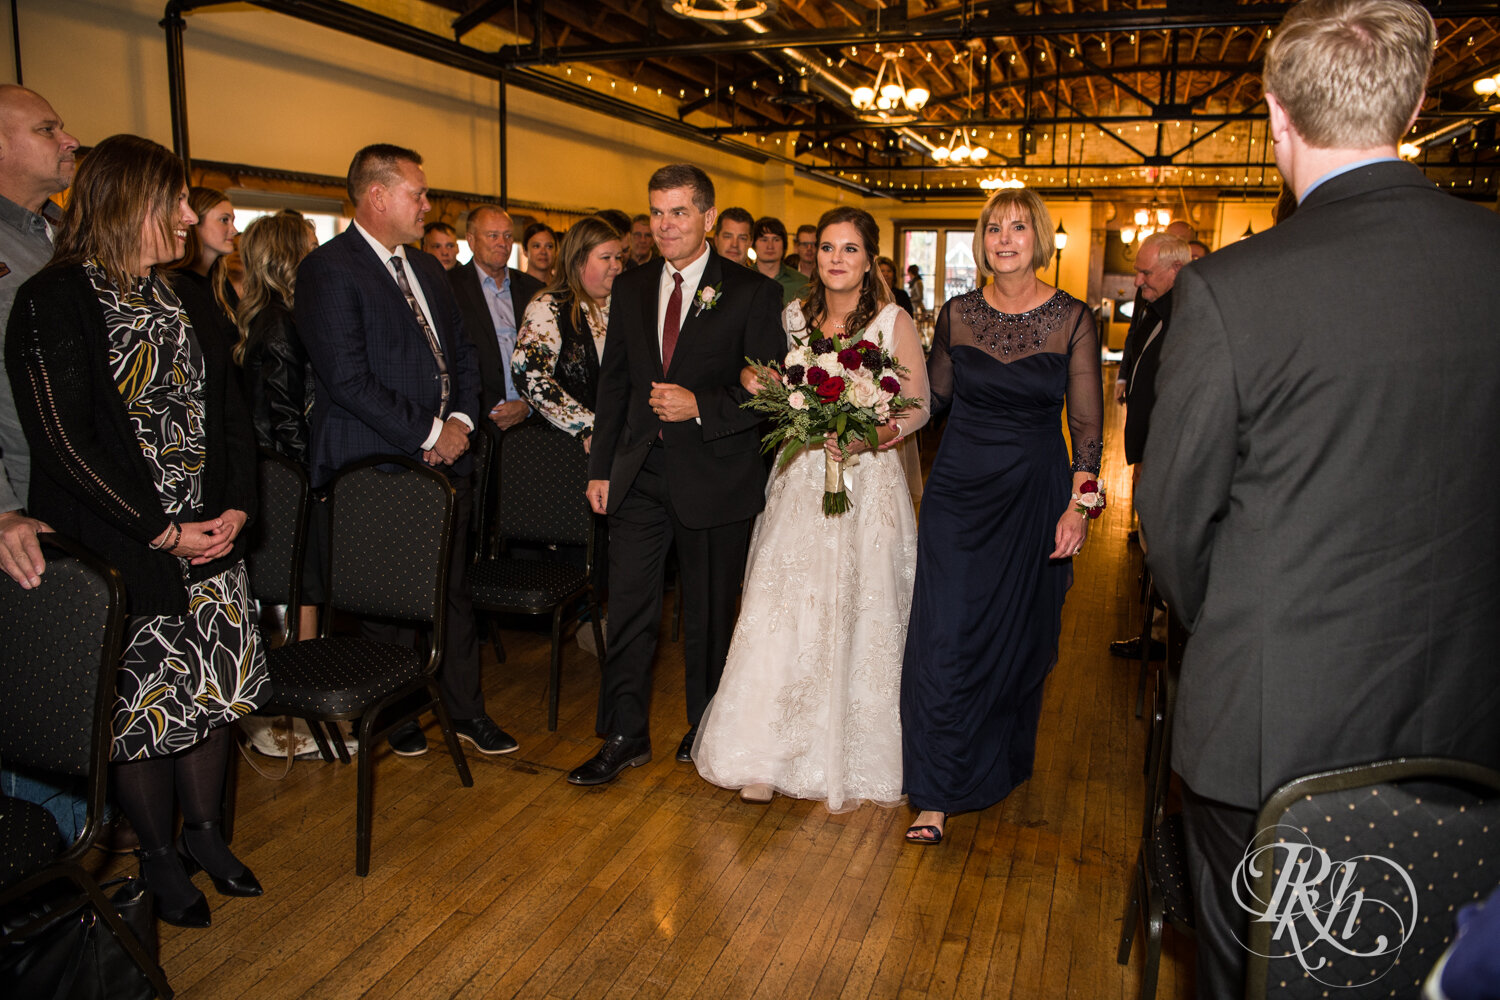 Bride walks down the aisle with mom and dad at Kellerman's Event Center in White Bear Lake, Minnesota.